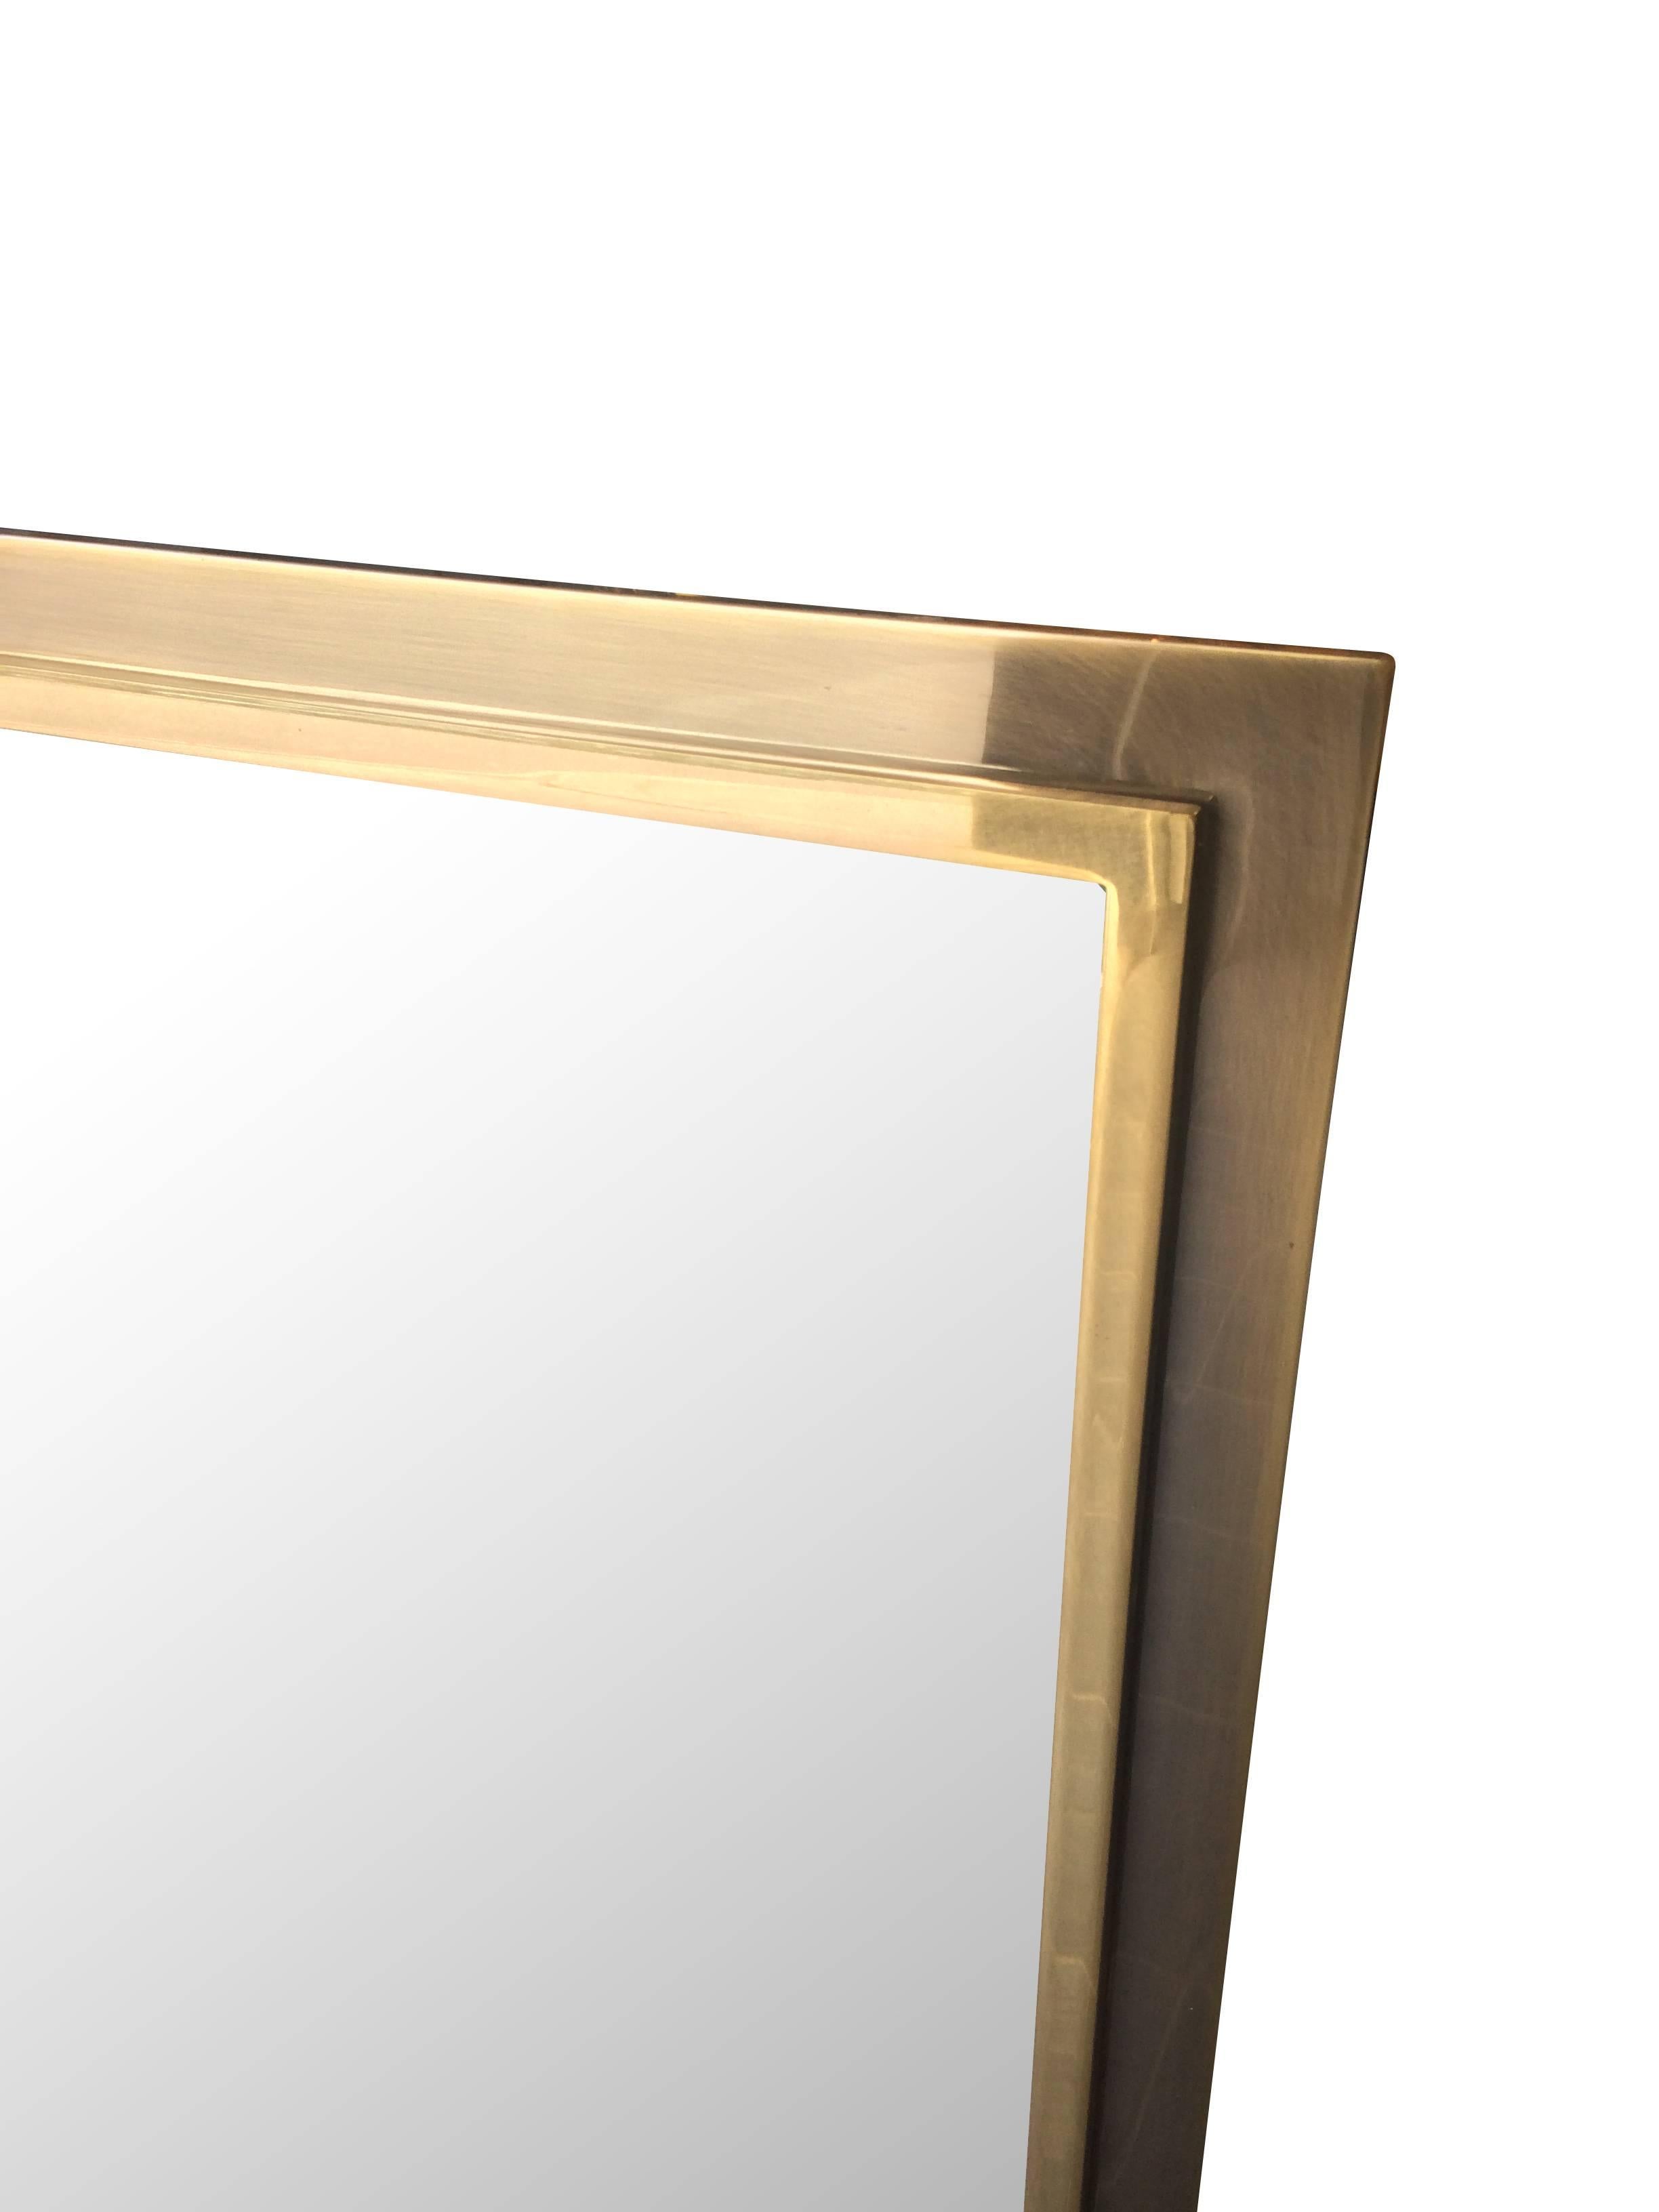 A Belgo chrome mirror with smoked gilt metal and brass surround. 
Also available is matching console see other listing.